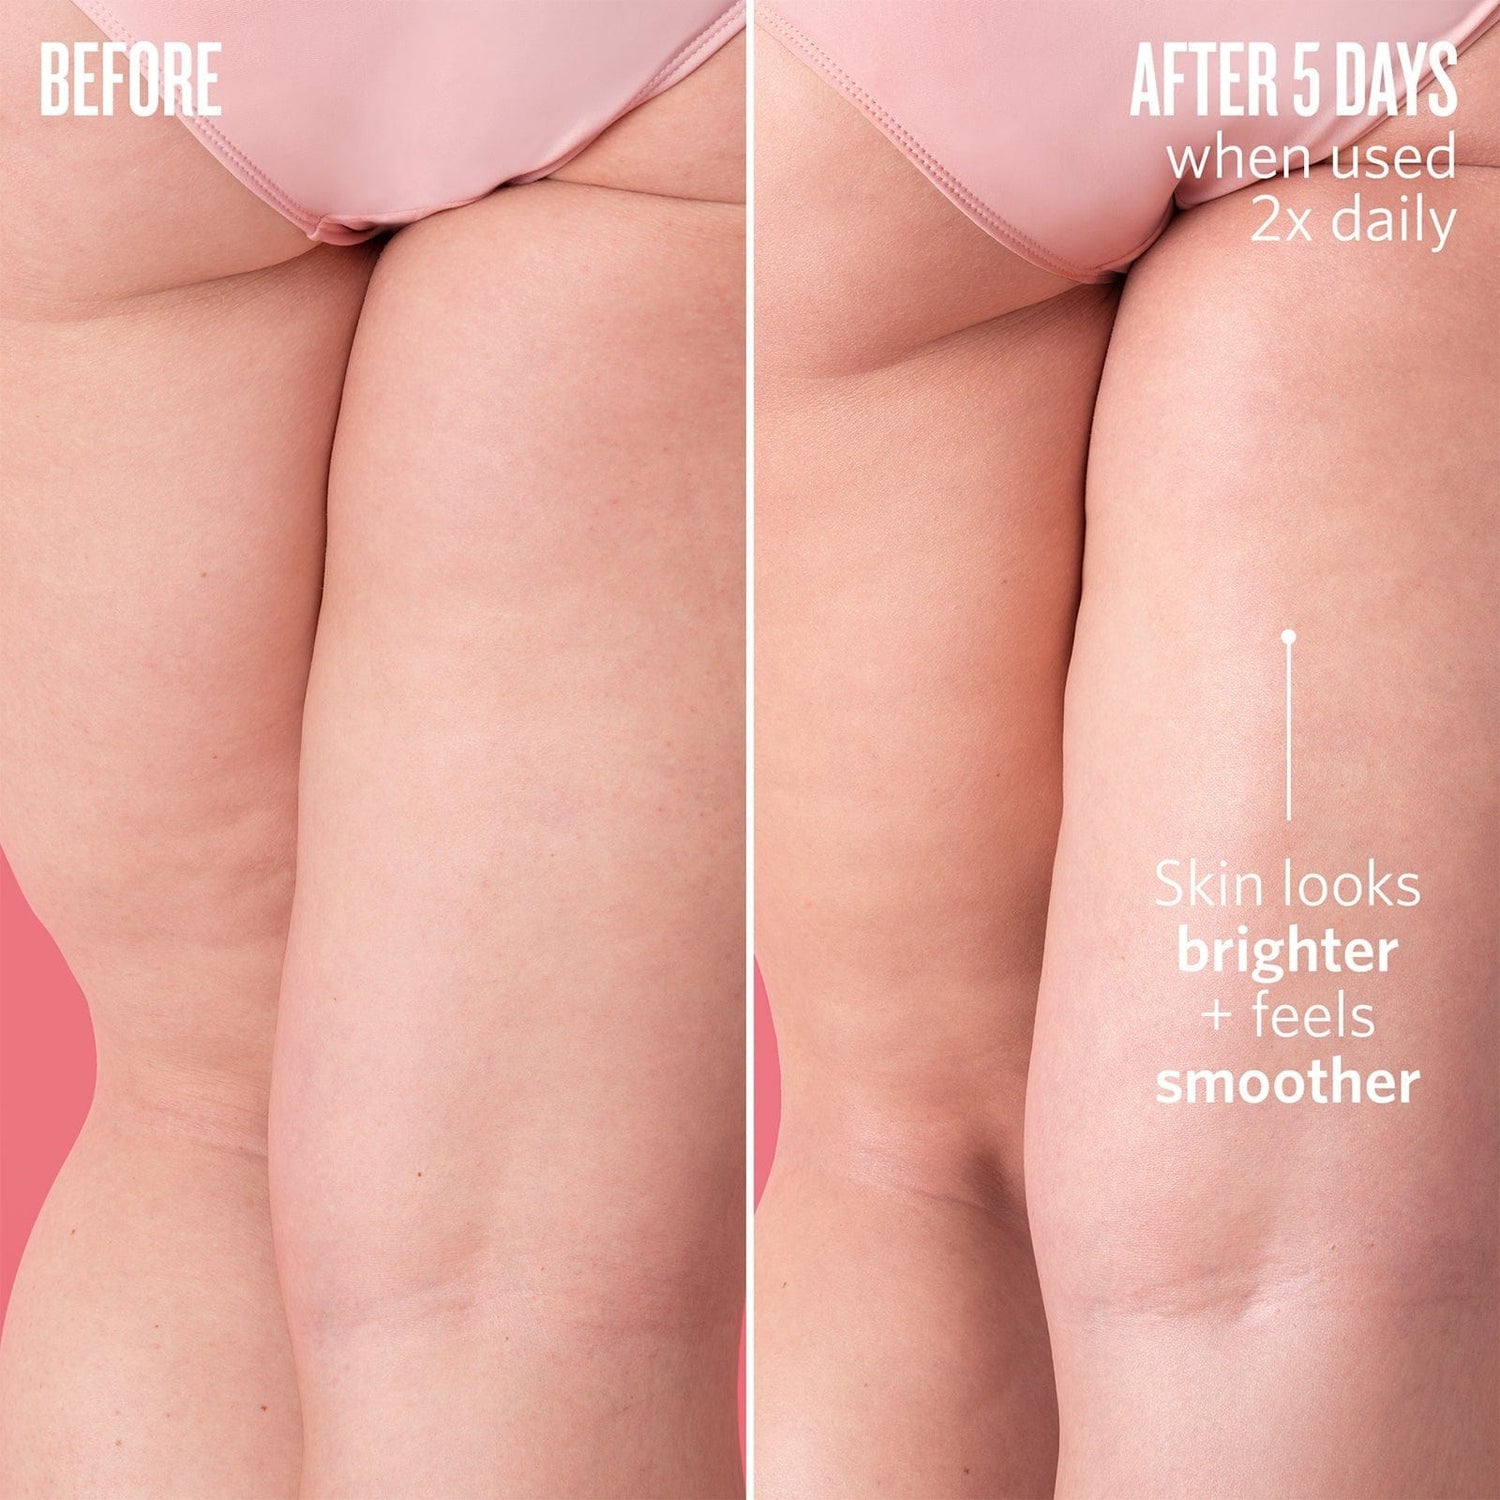 Before // After 5 days when used 2x daily, skin looks brighter + feels smoother.